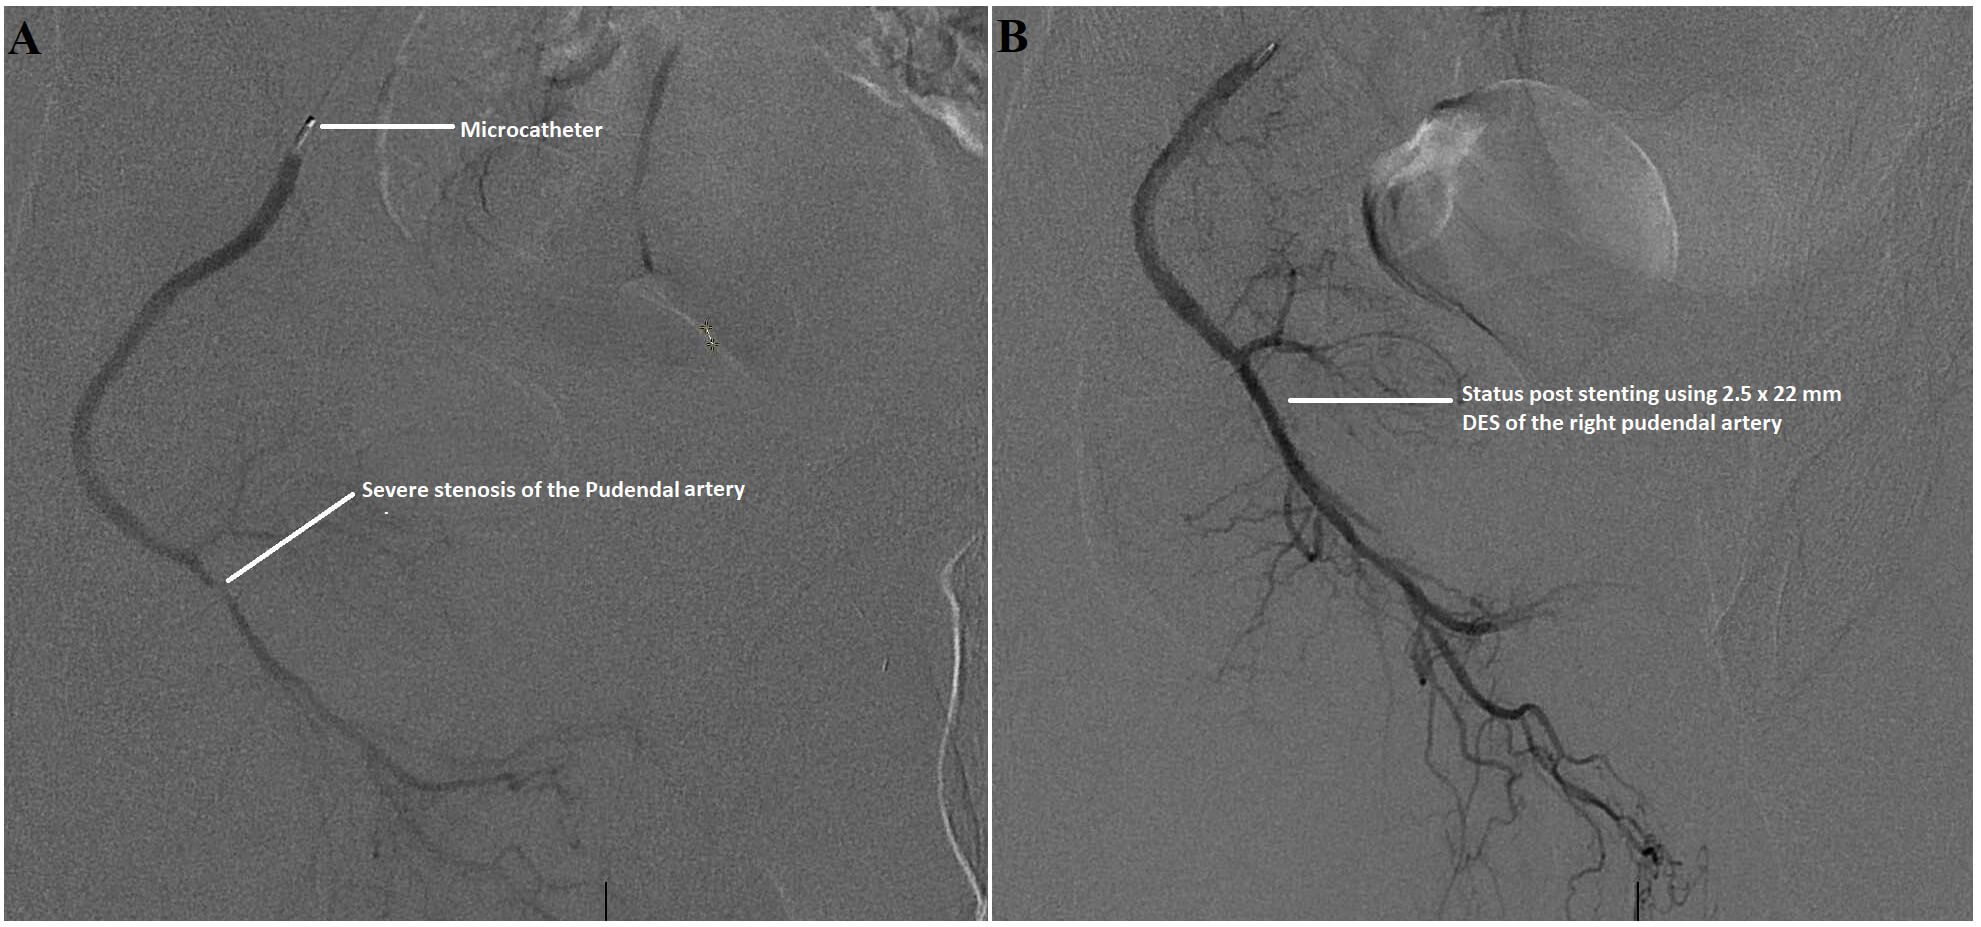 Severe atherosclerotic stenosis of the right pudendal artery